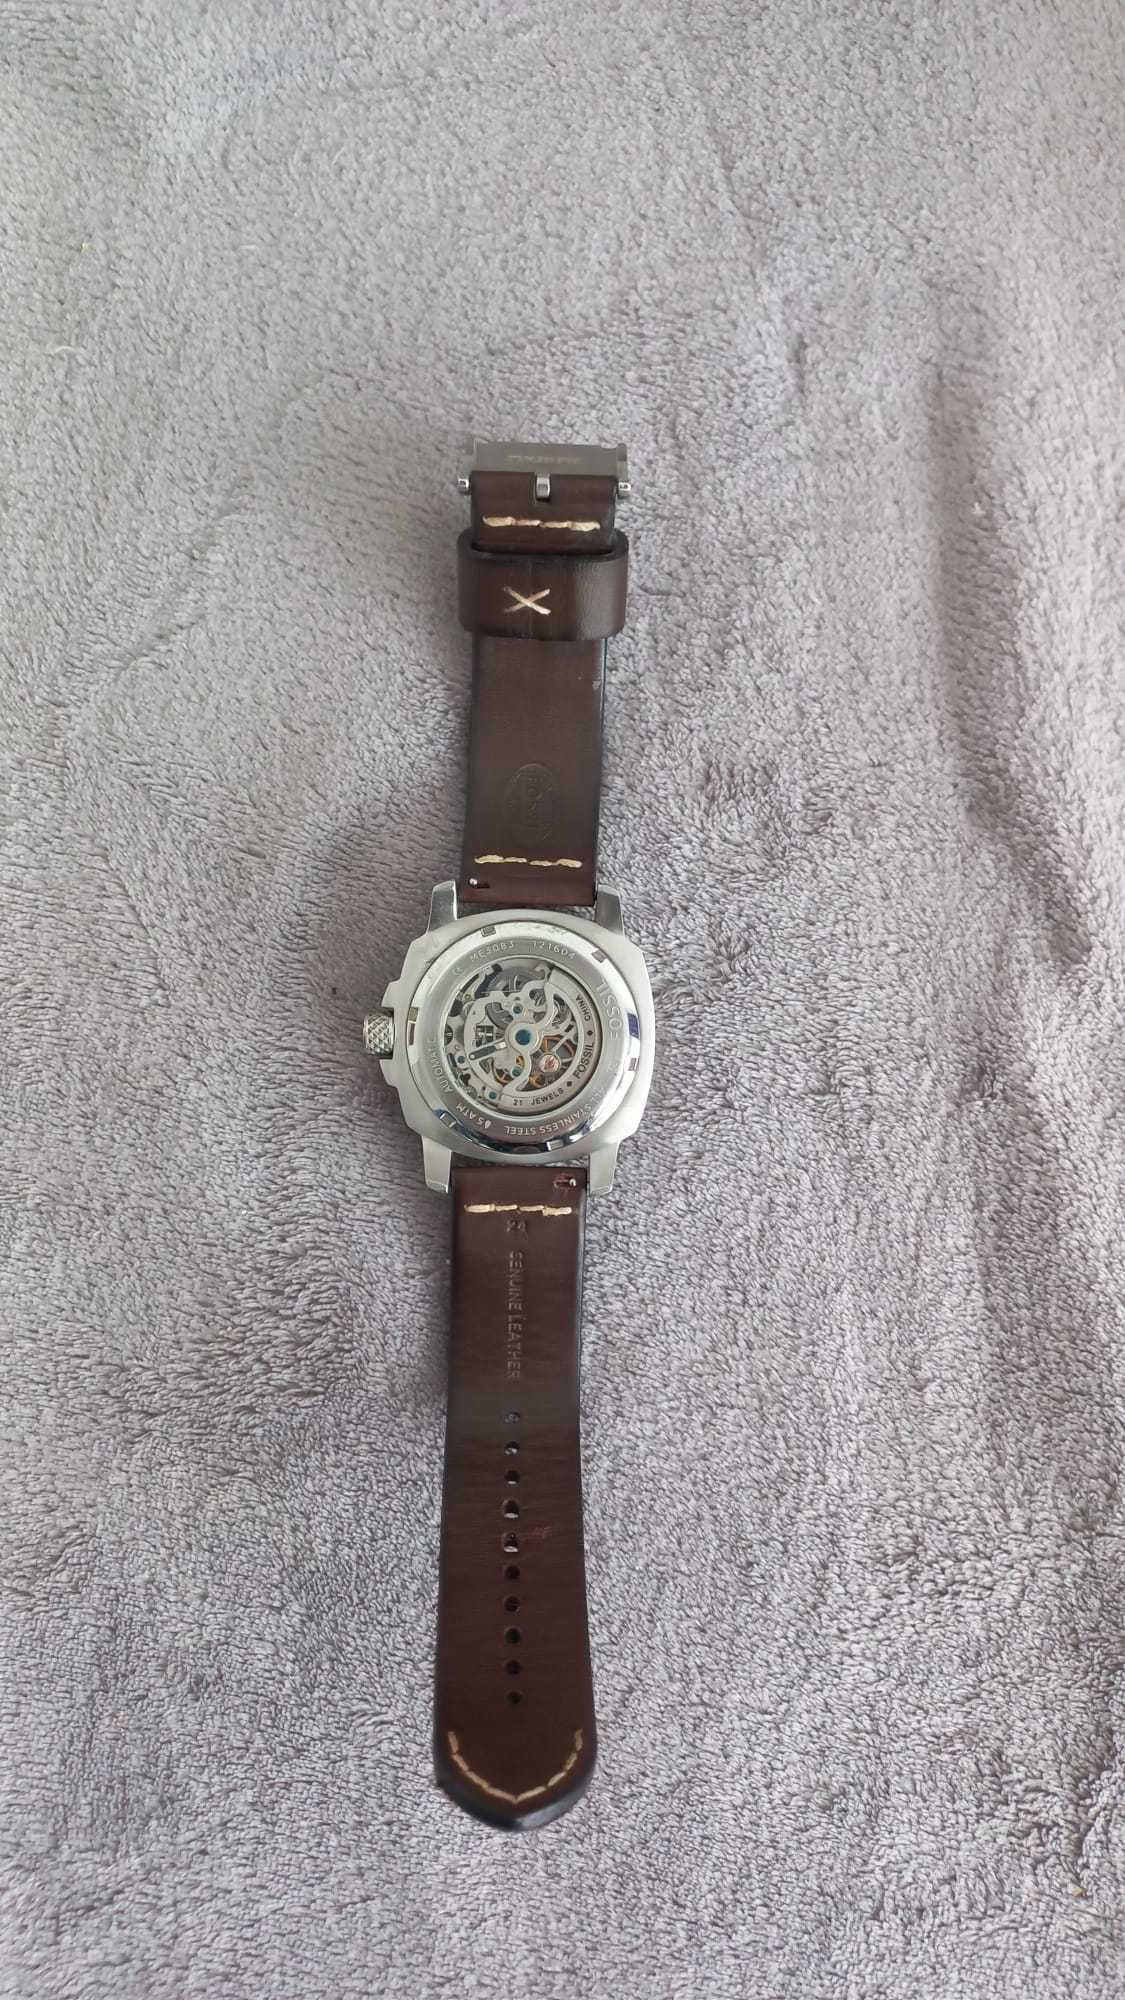 Ceas Fossil Automatic